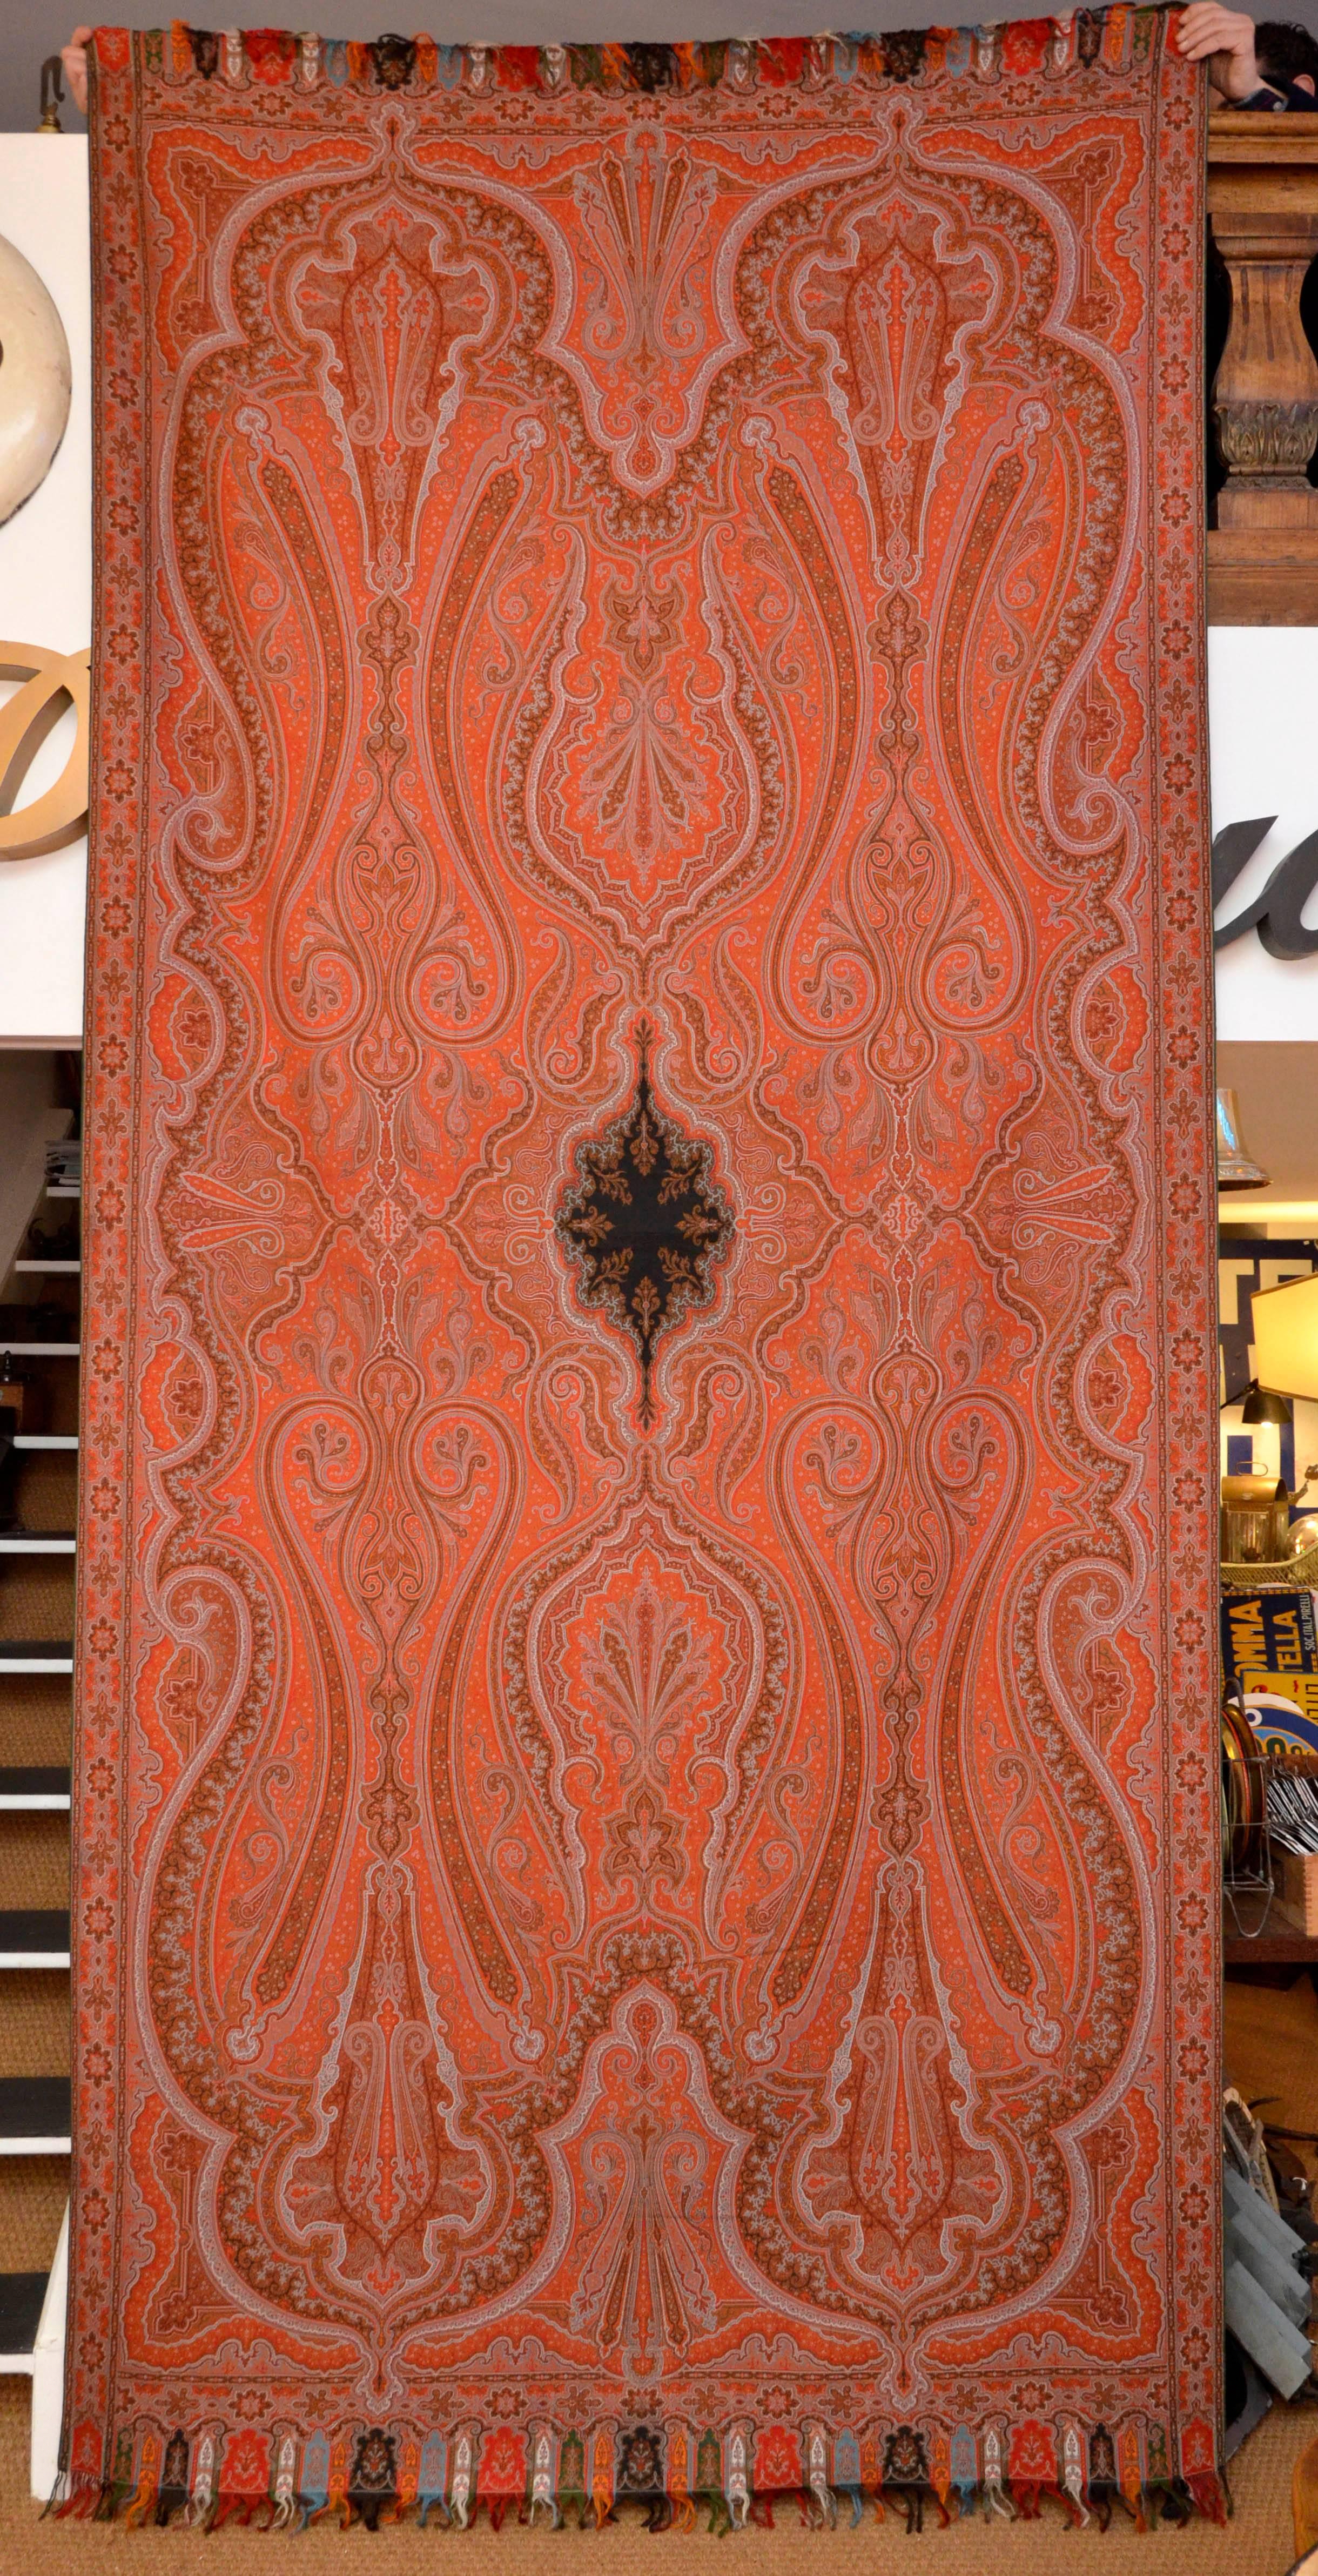 Late 19th Century French Kashmir Paisley Jacquard Shawl In Good Condition For Sale In Milan, IT